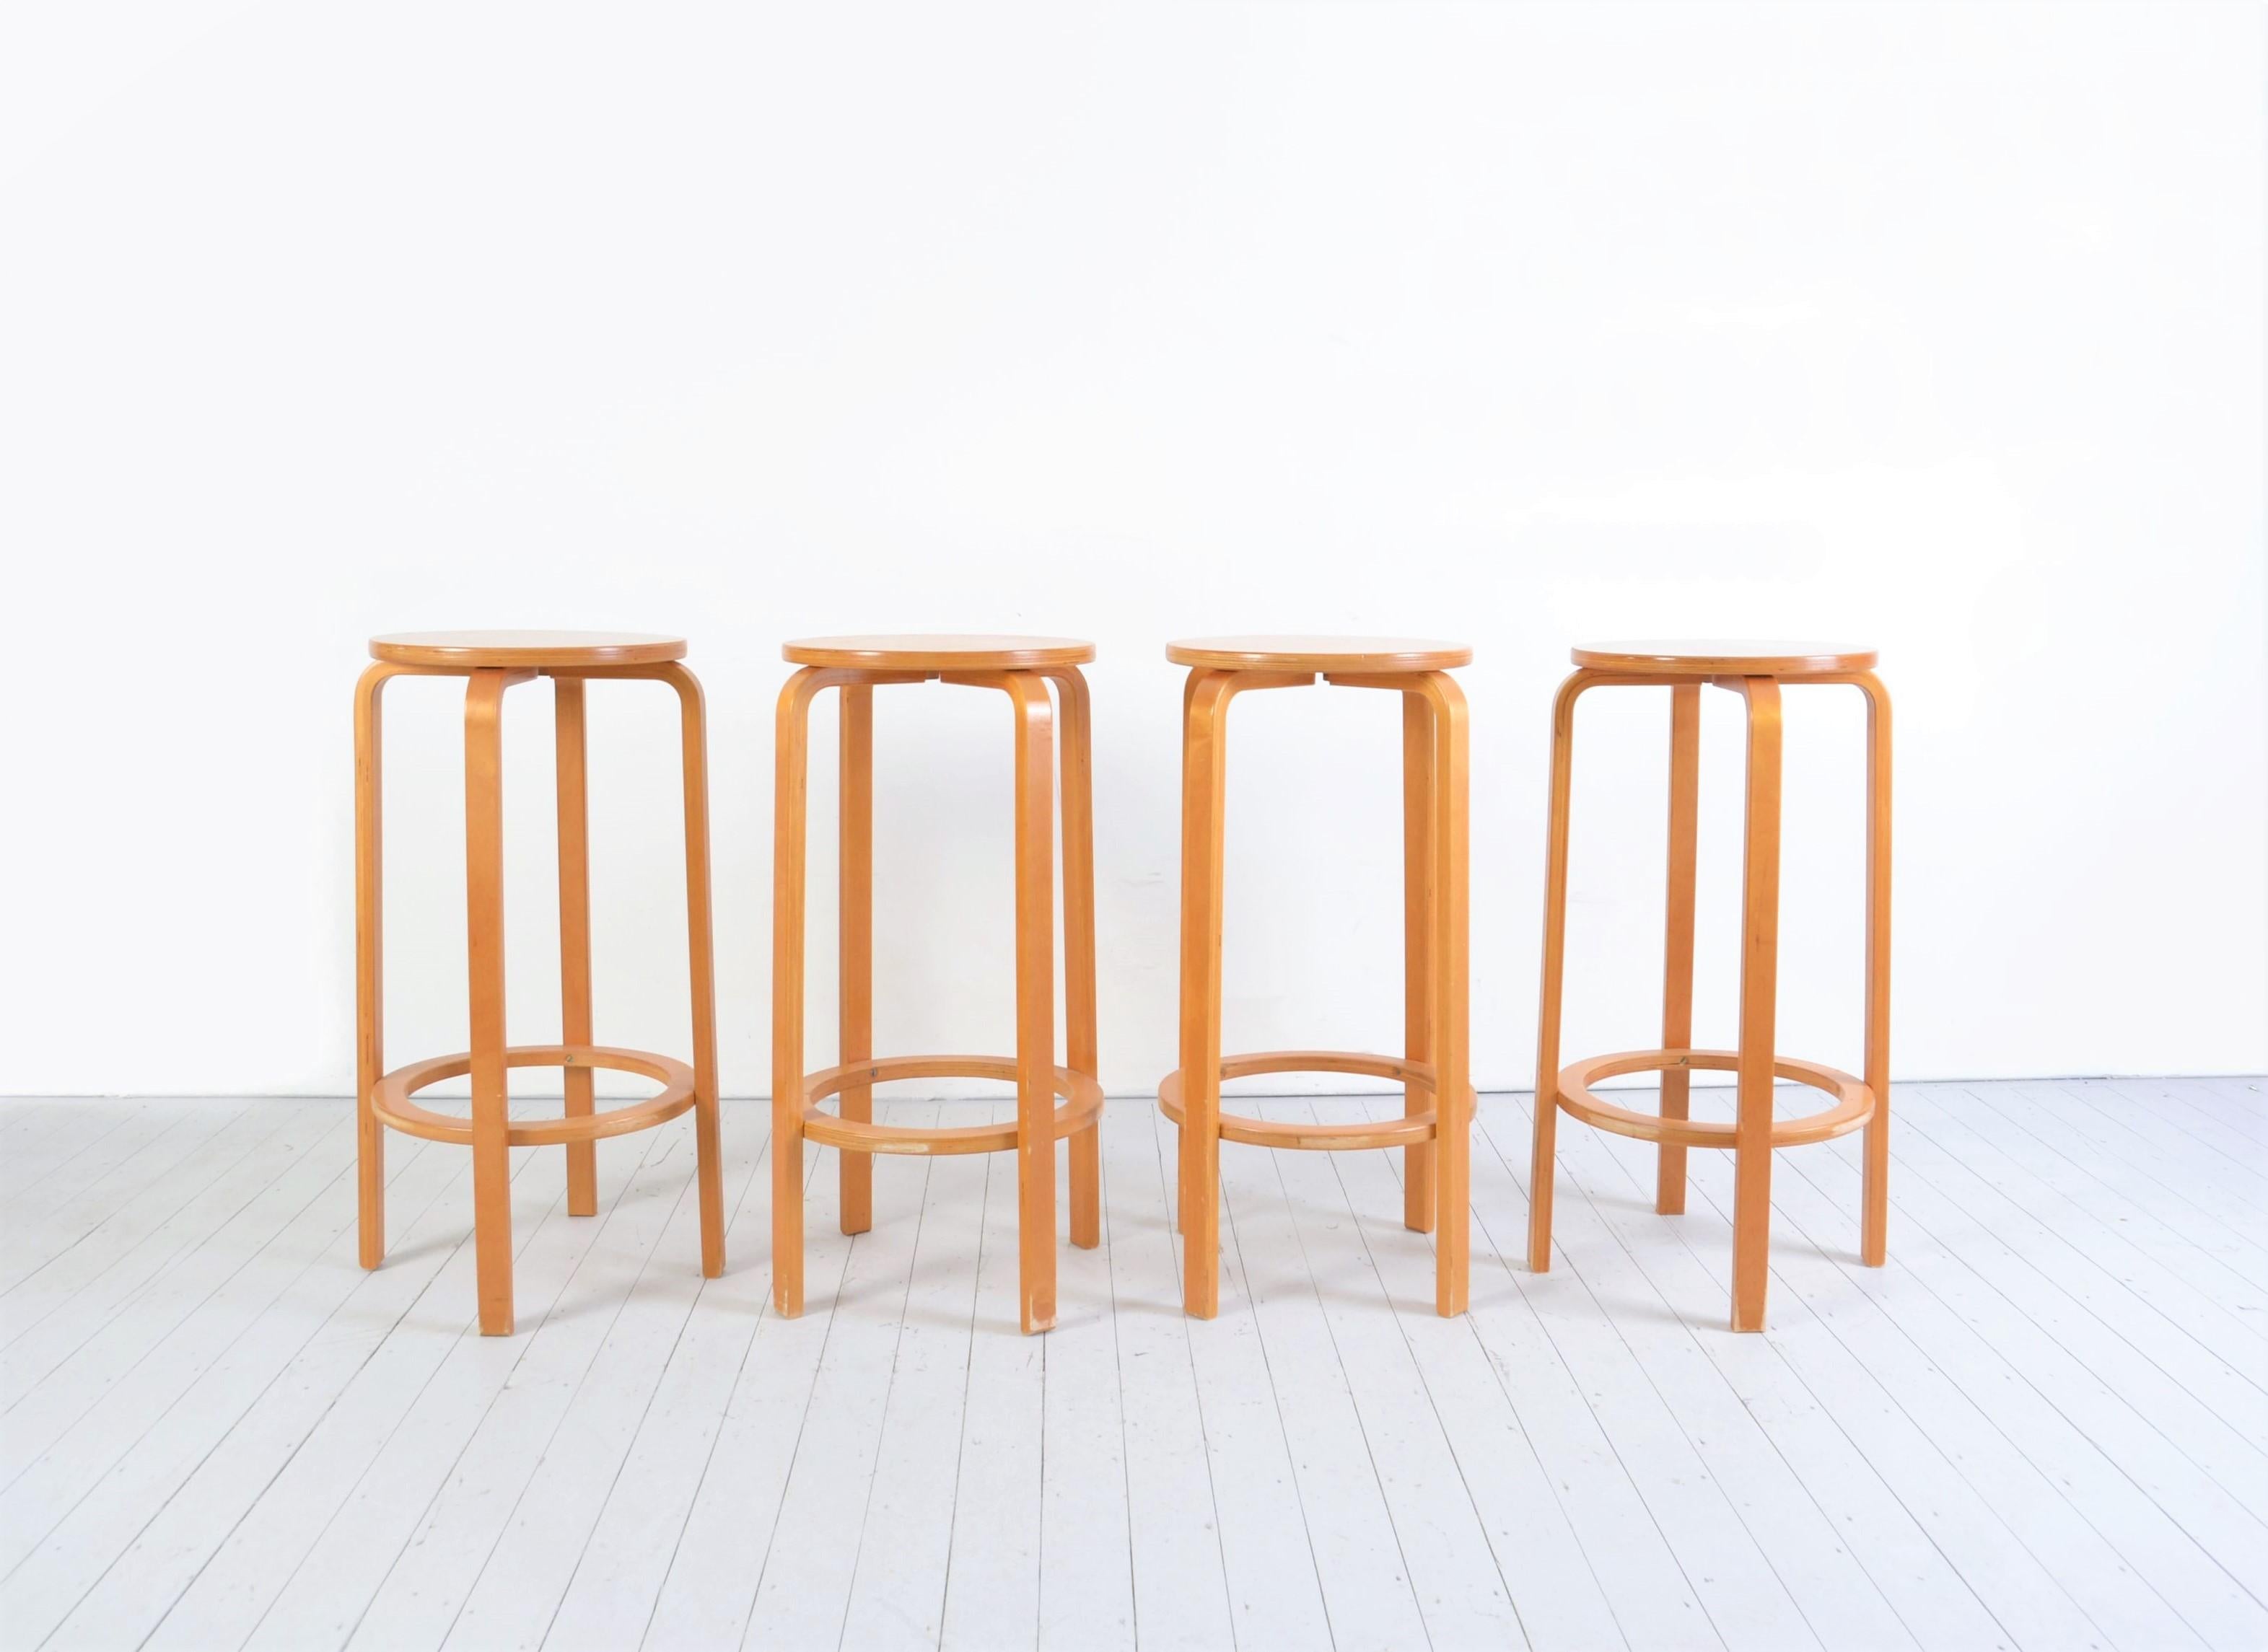 These stools are made out of bended beech wood and are characteristic of the style of Alvar Aalto. The stools are in good condition but may show some signs of use consistent to there age.